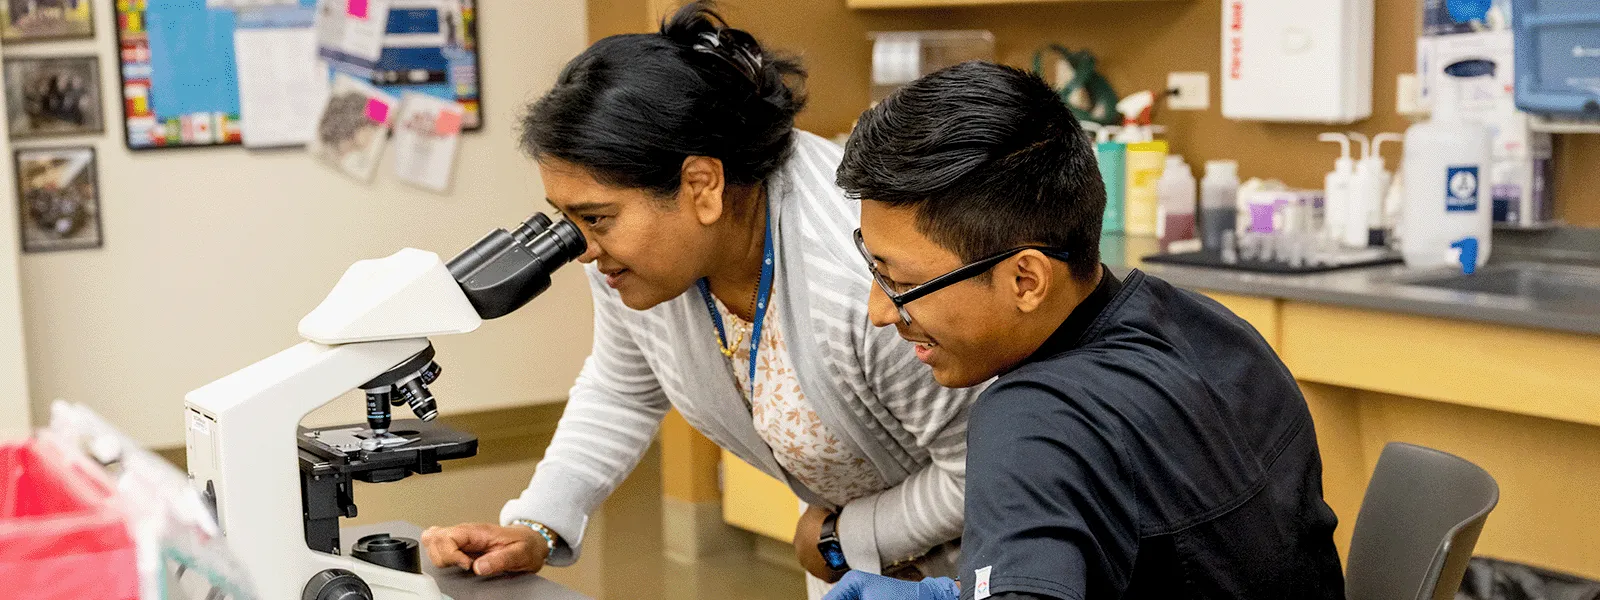 Professor looks through a microscope as student observes